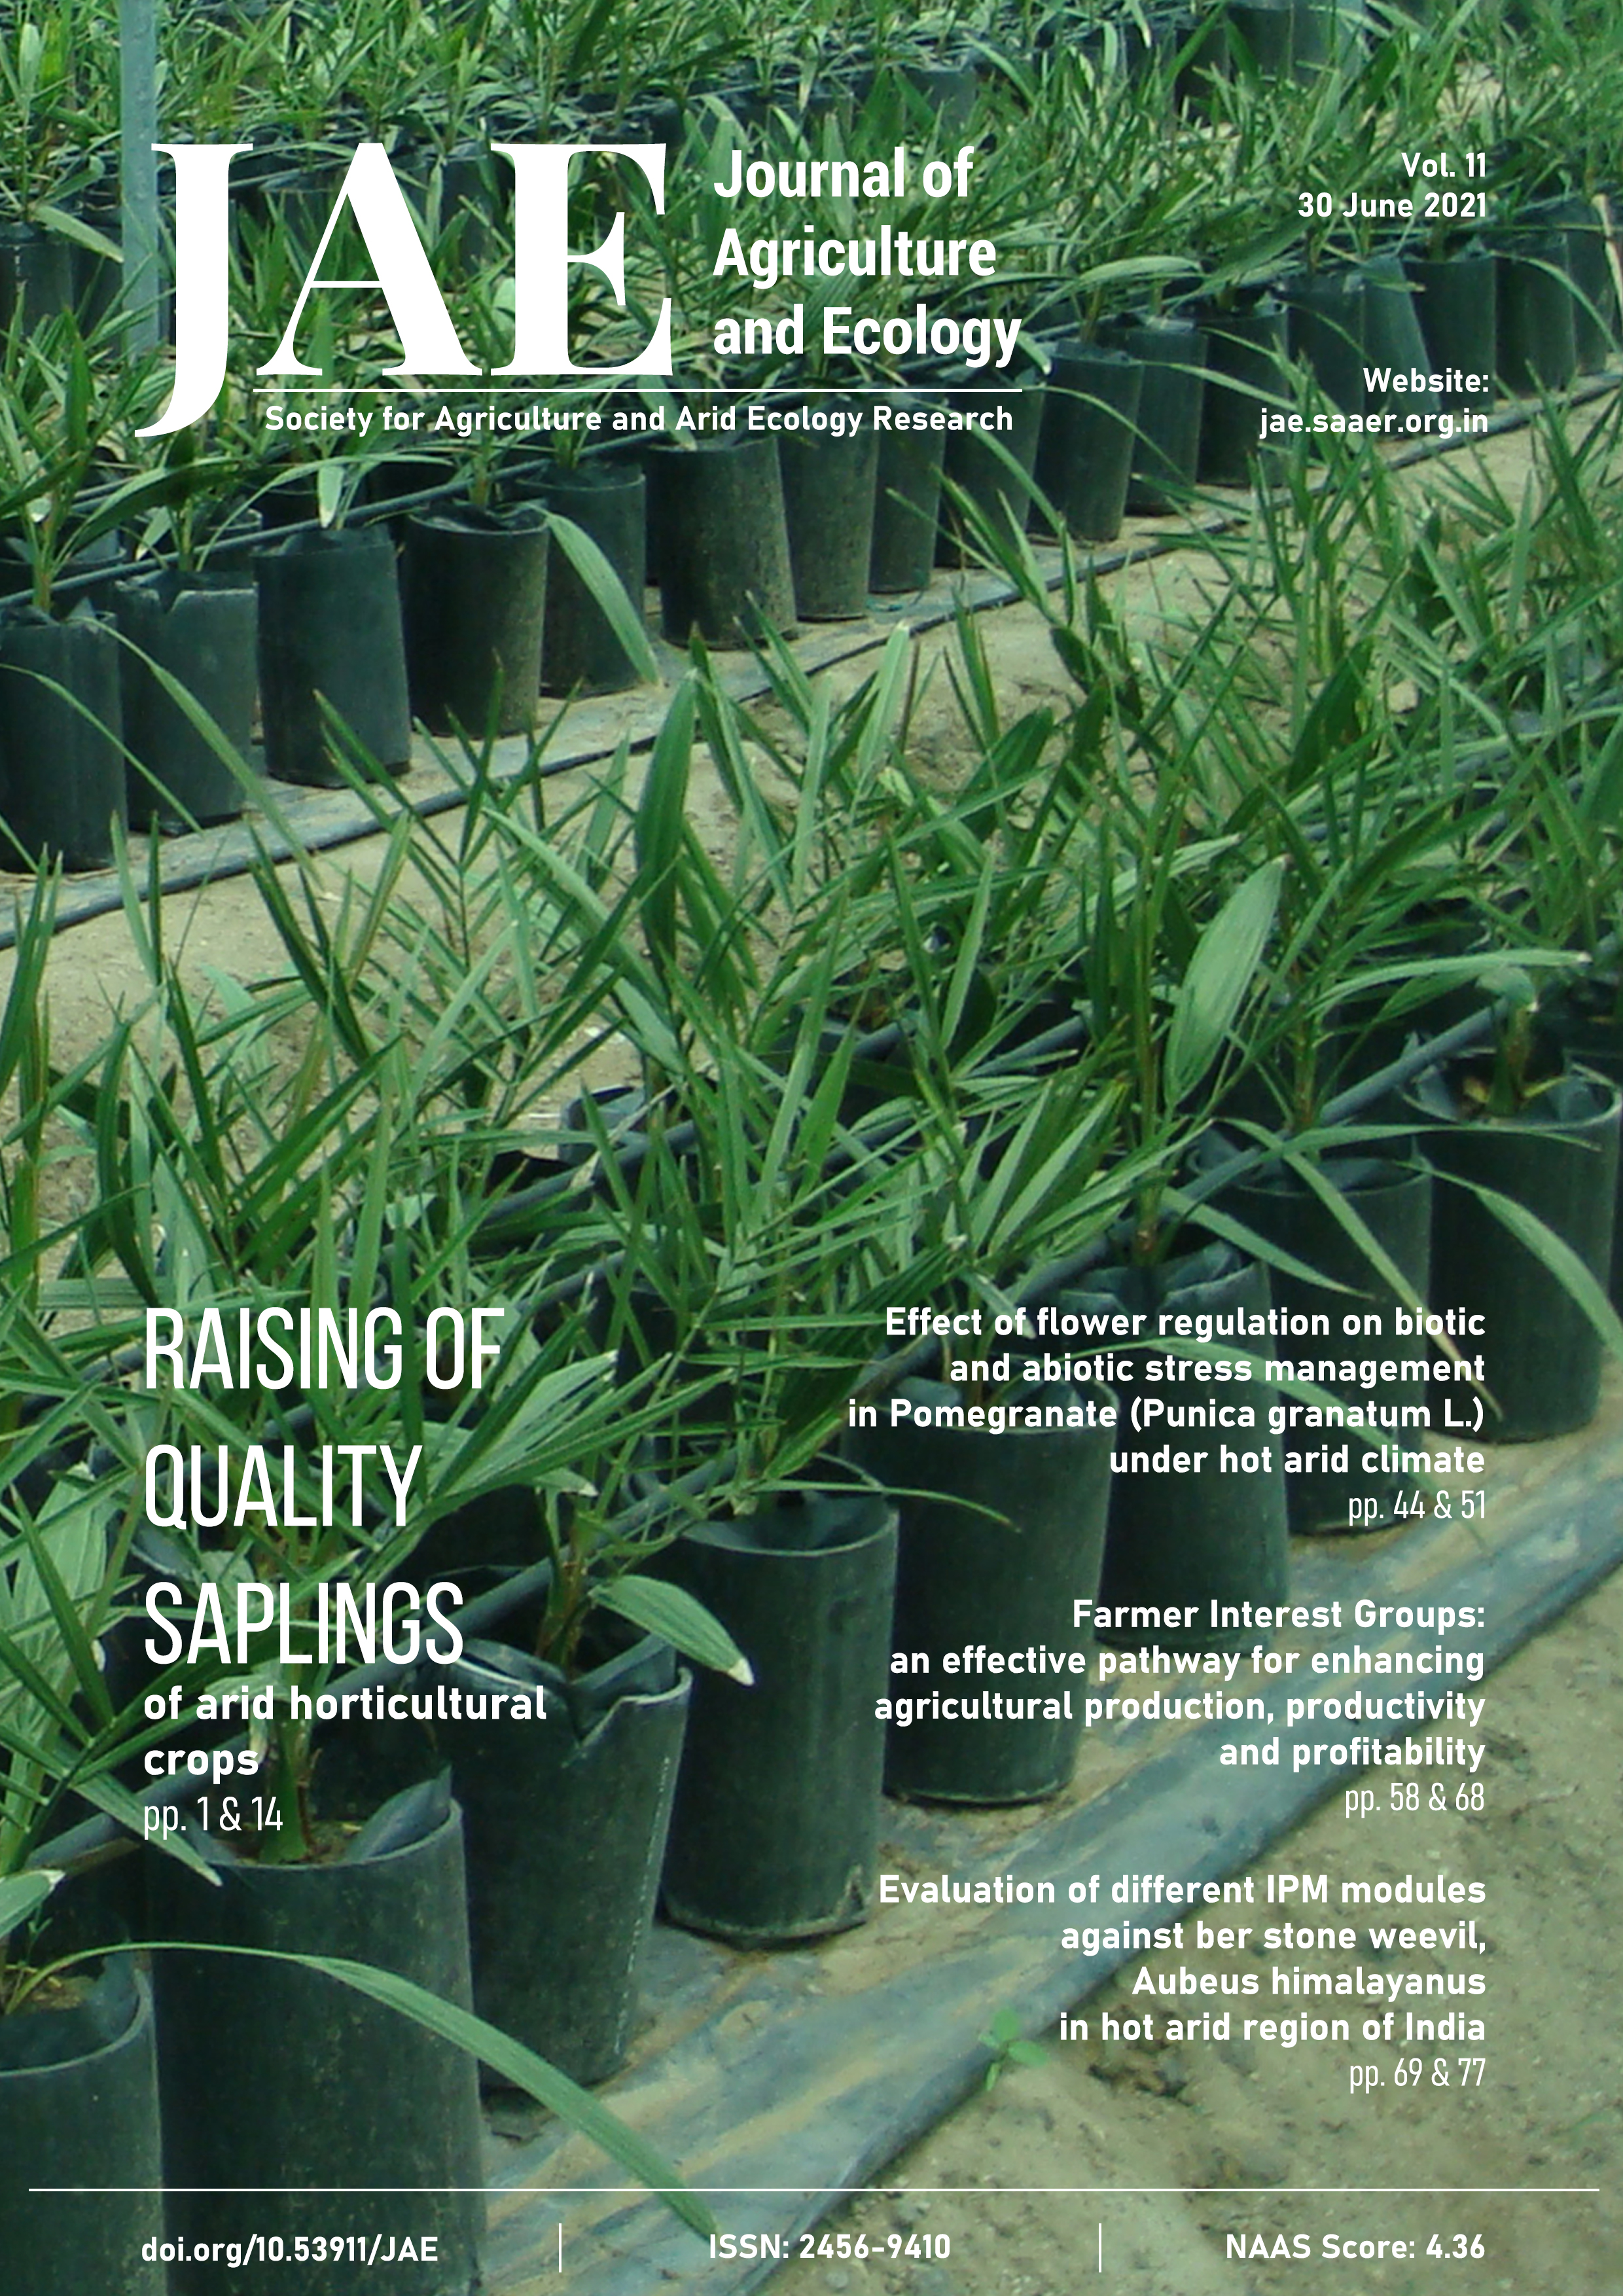 Journal of Agriculture and Ecology Issue 11 Cover